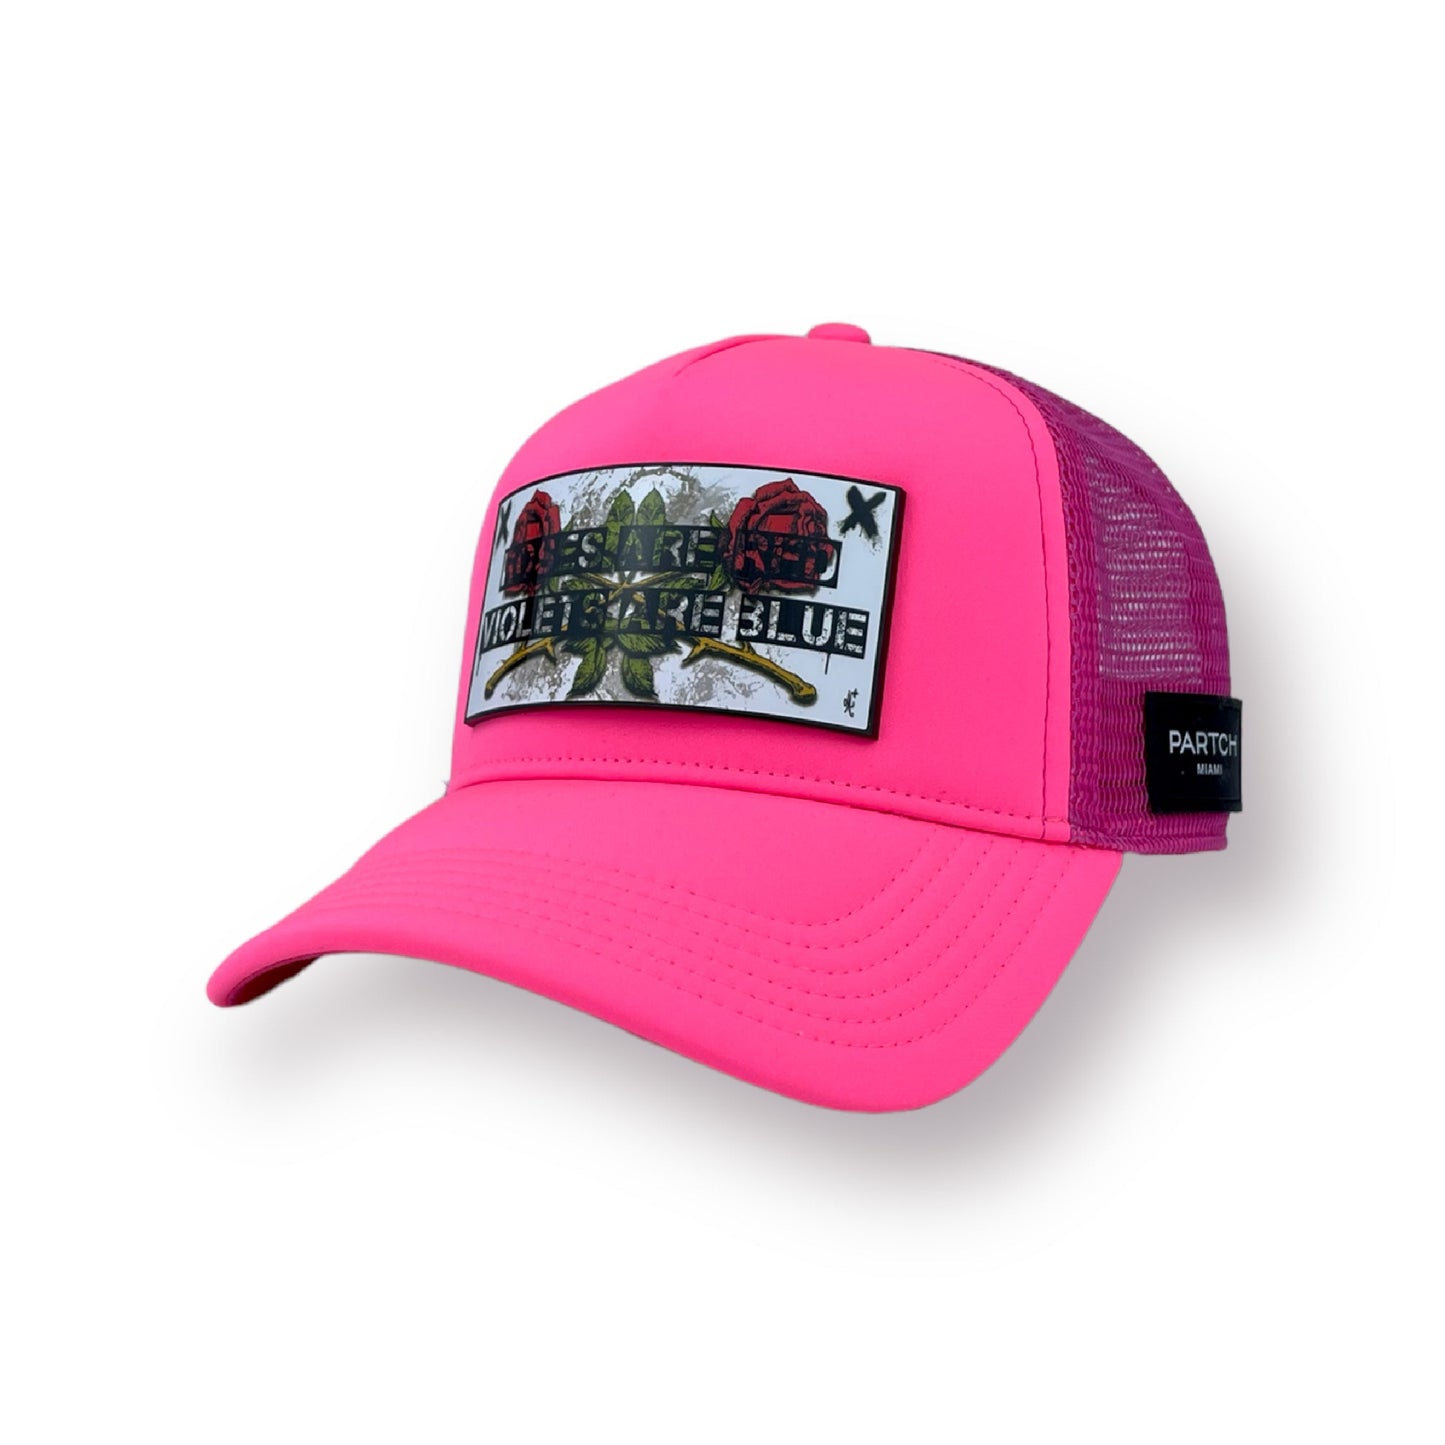 Partch pink trucker hat with Art Roses